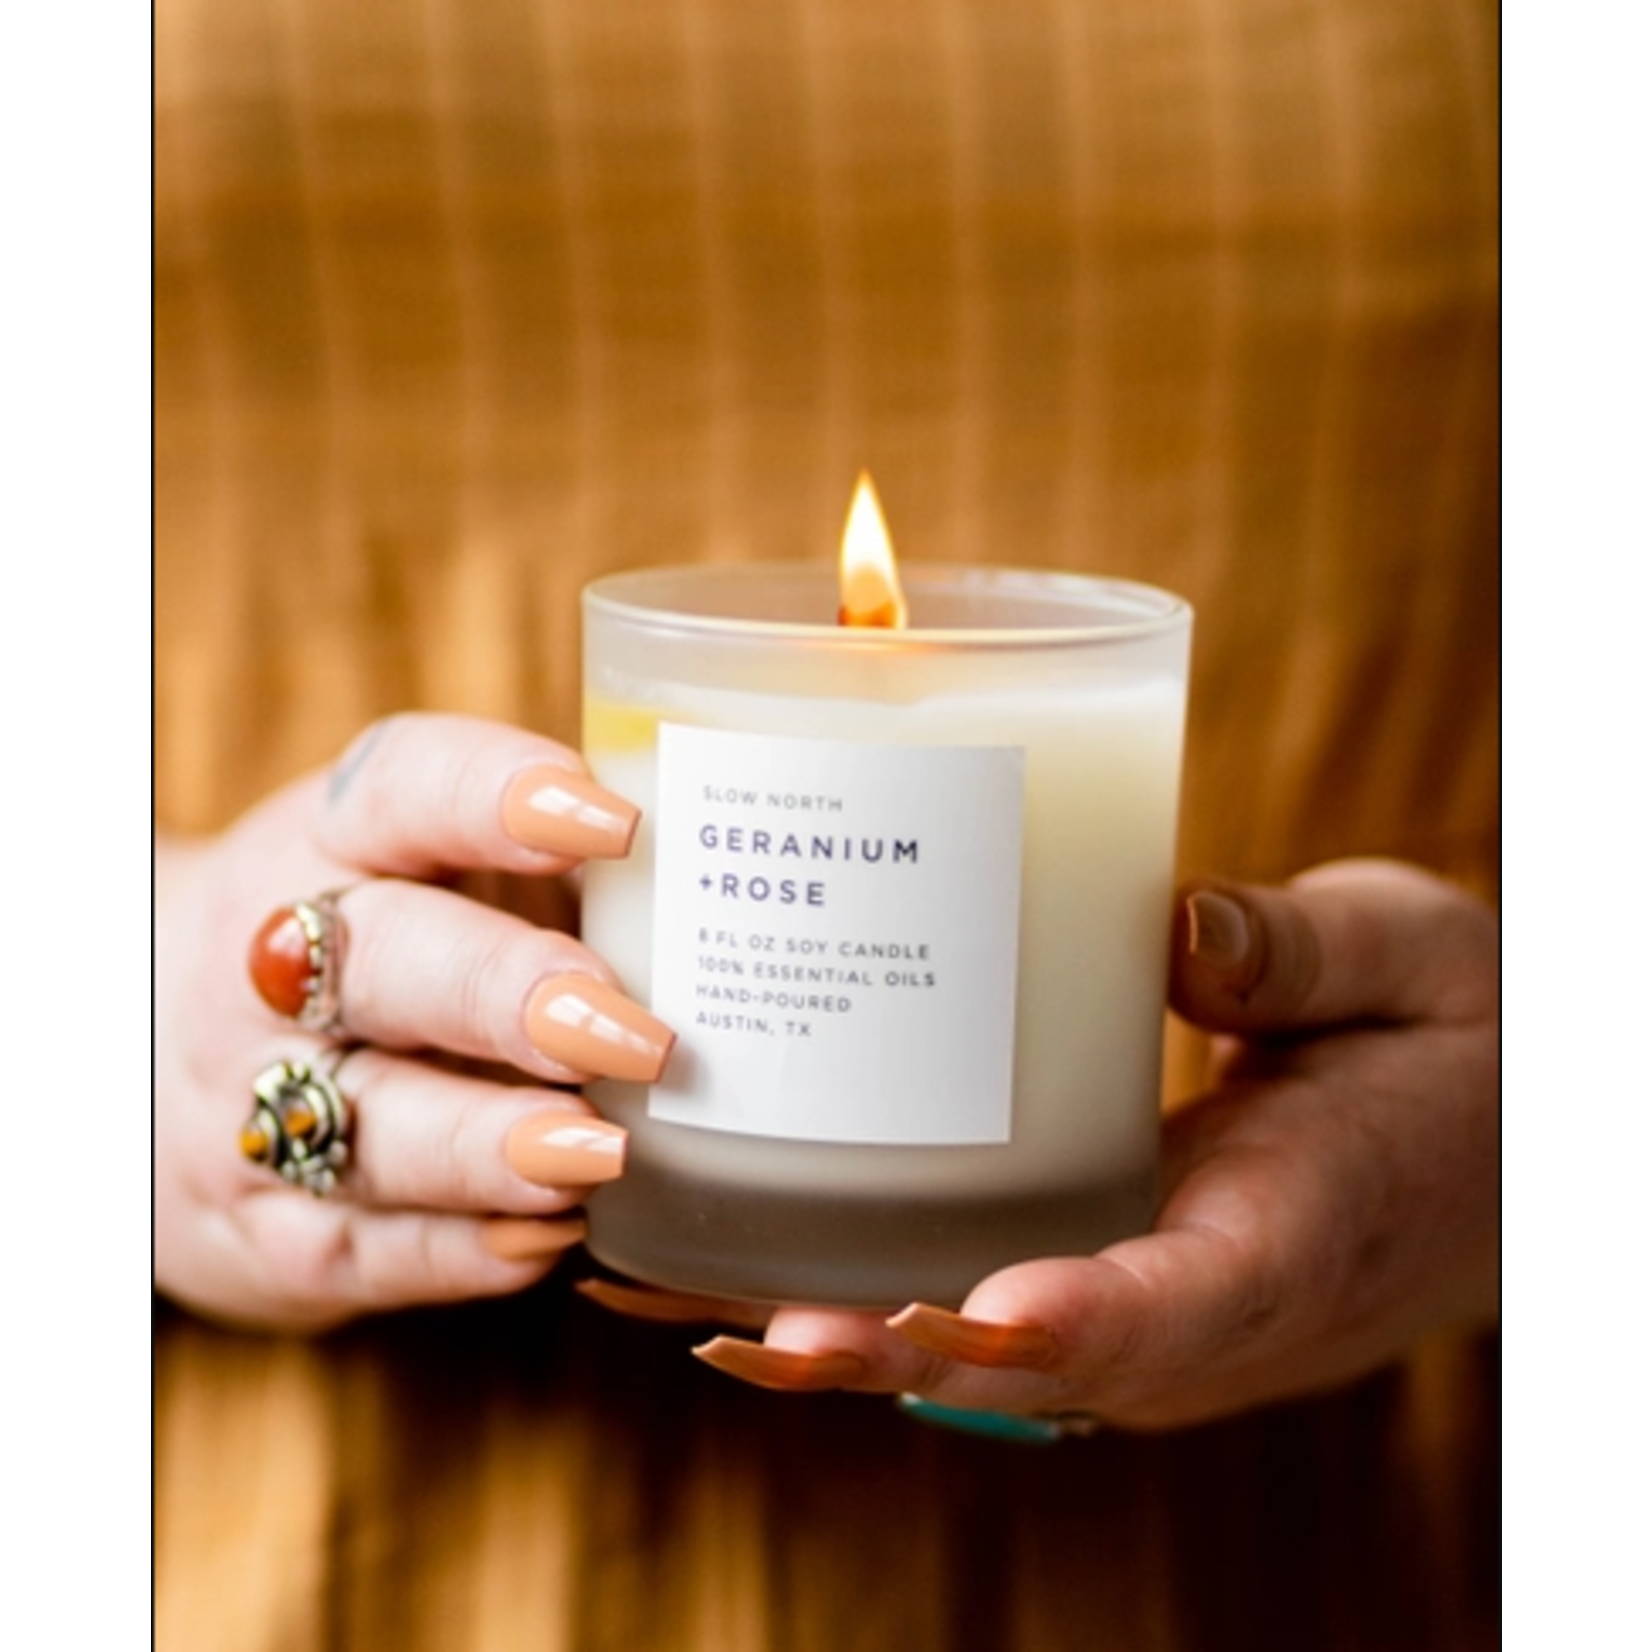 slow north Slow North Geranium + Rose Frosted Candle